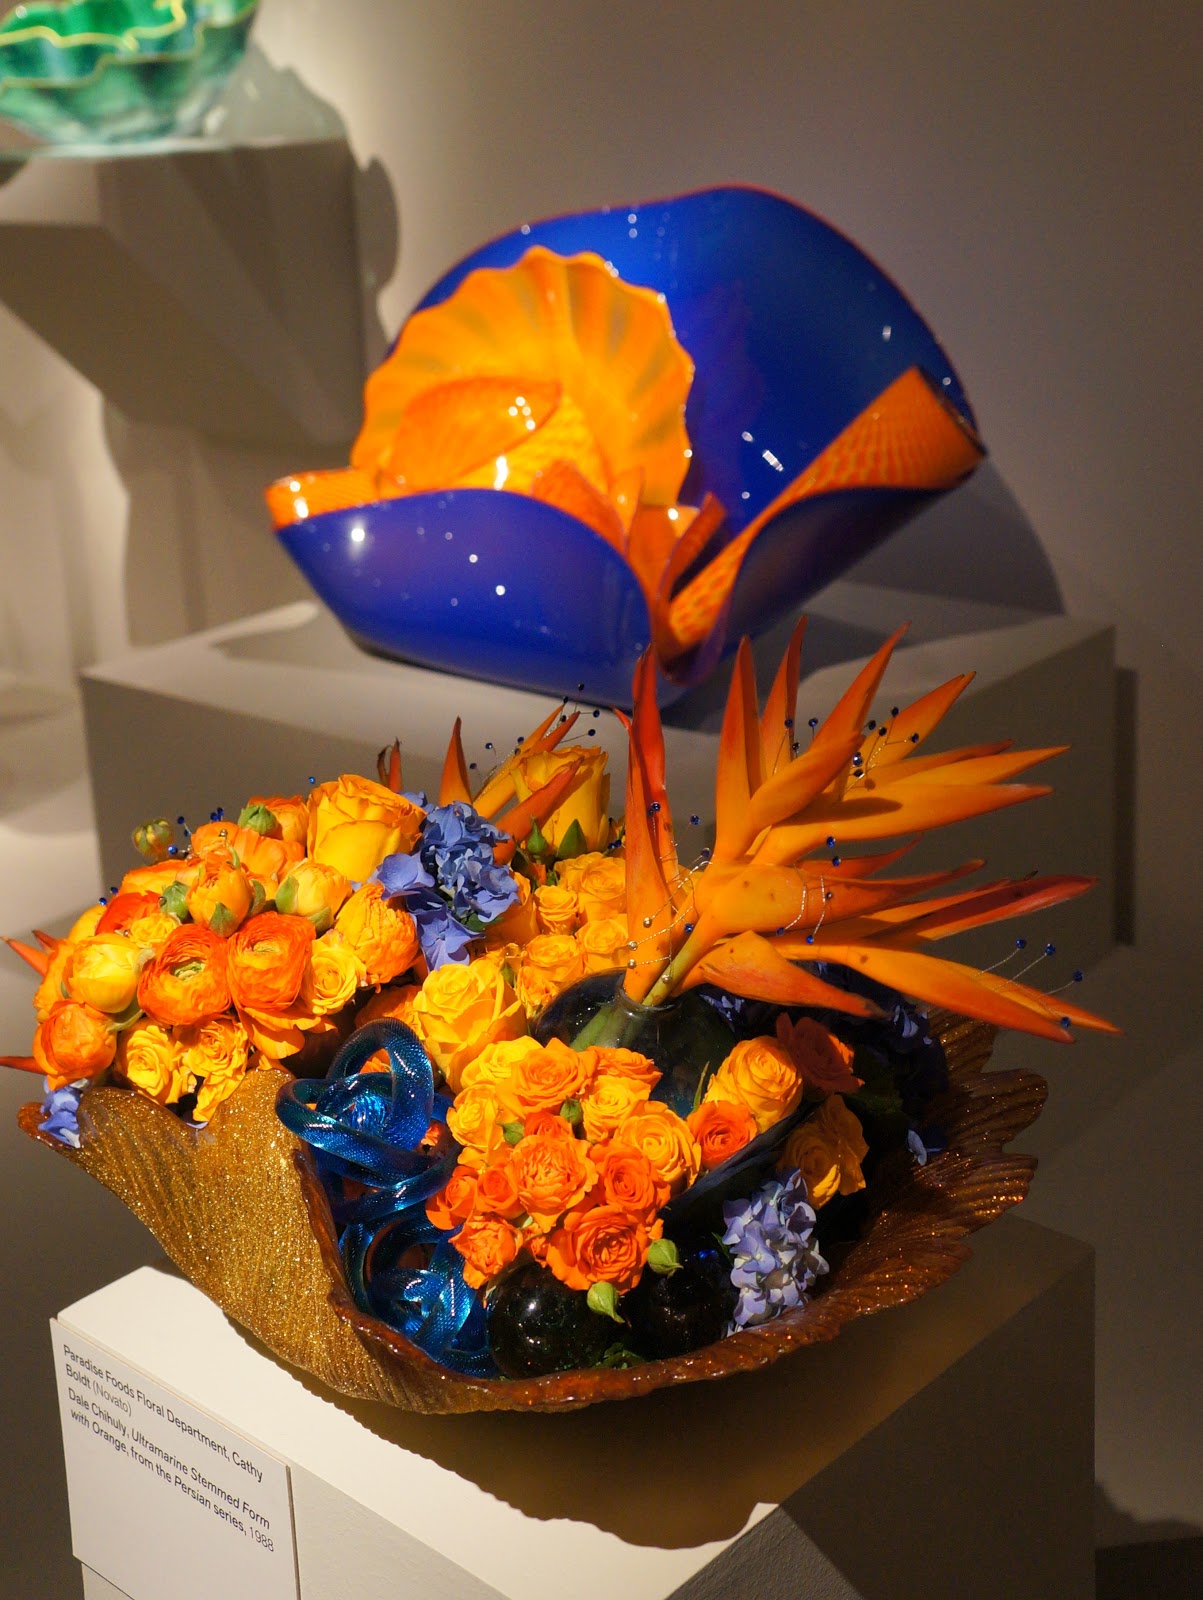 In Full Bloom by MJL Bouquets to Art at the de Young, San Francisco